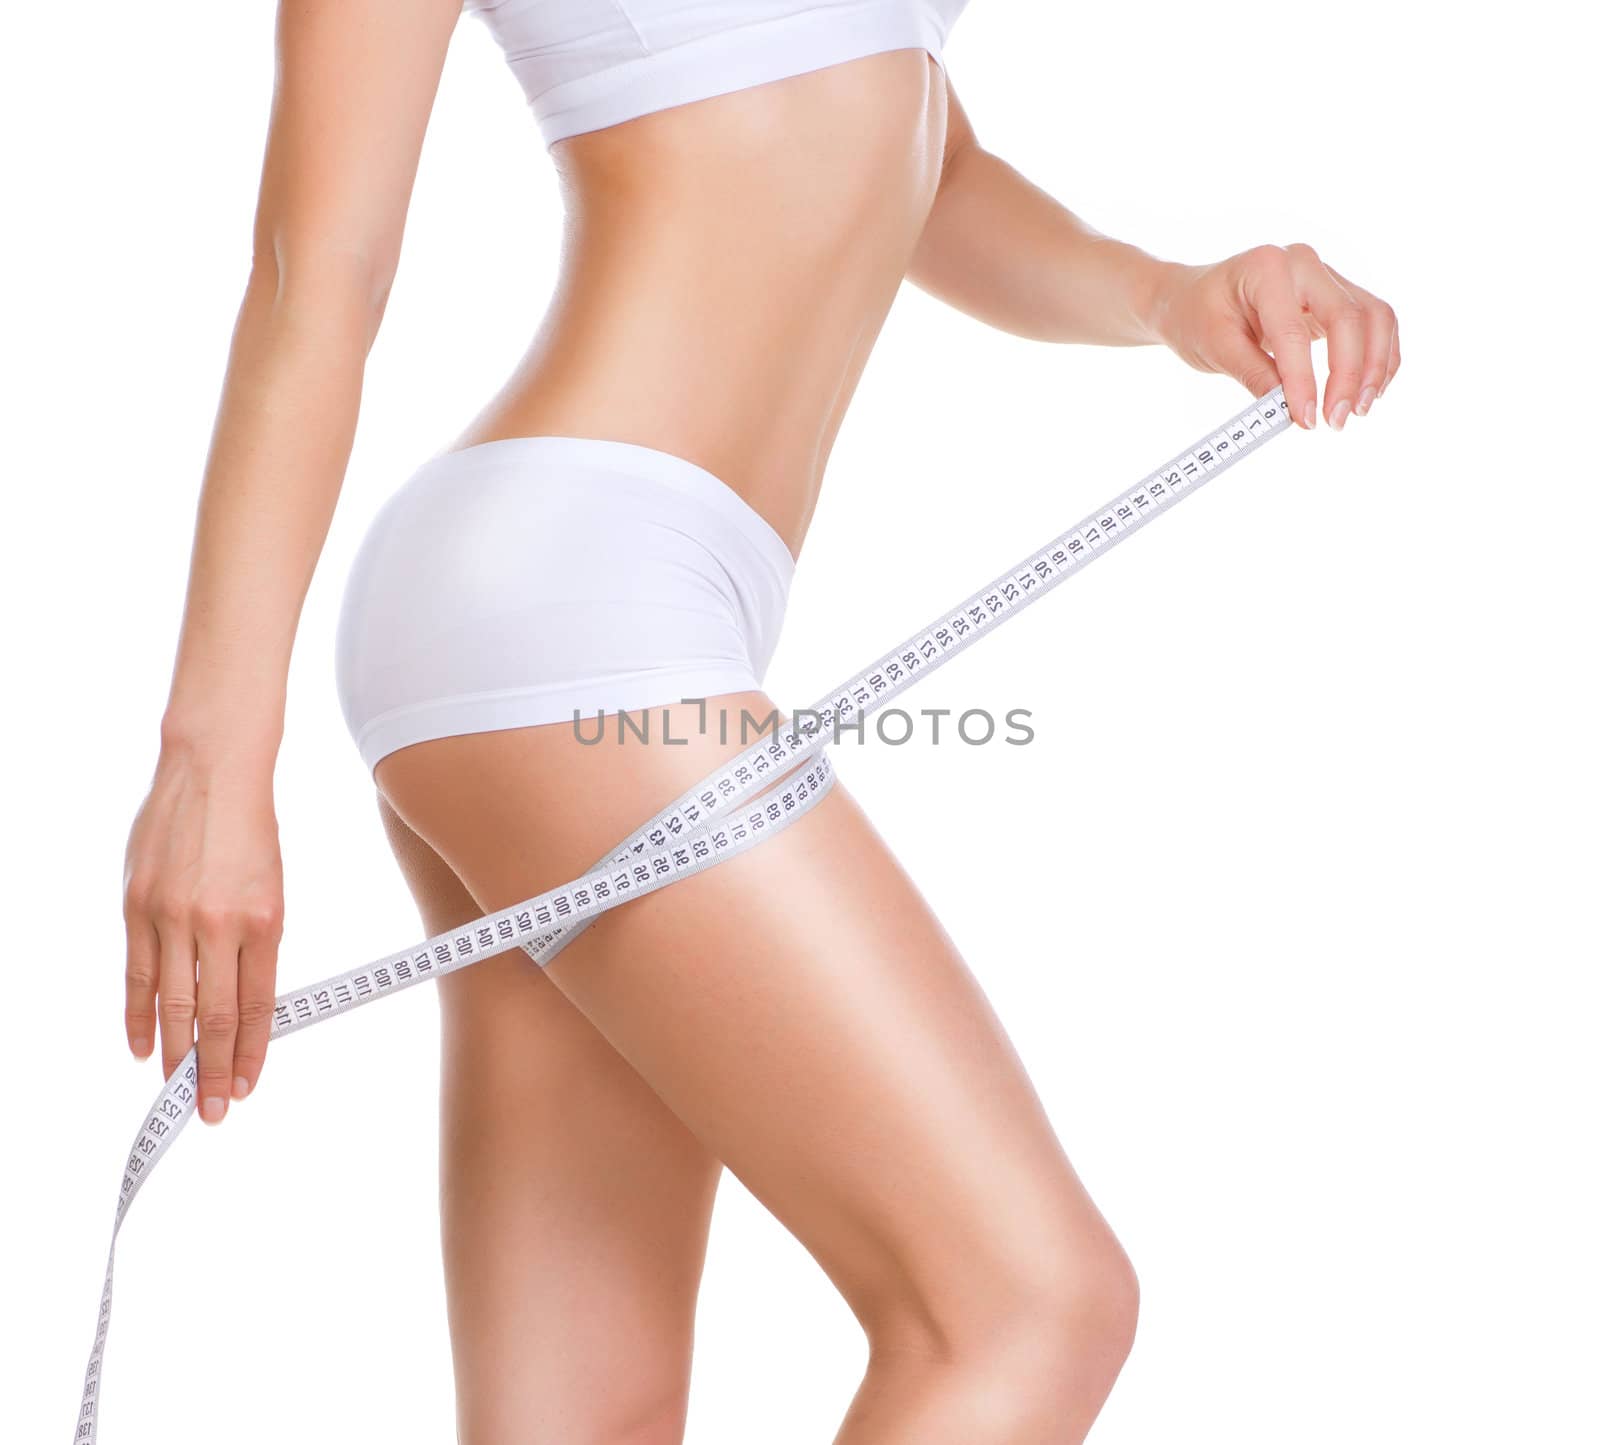 Woman Measuring Her Perfect Body. Healthy lifestyle concept  by SubbotinaA